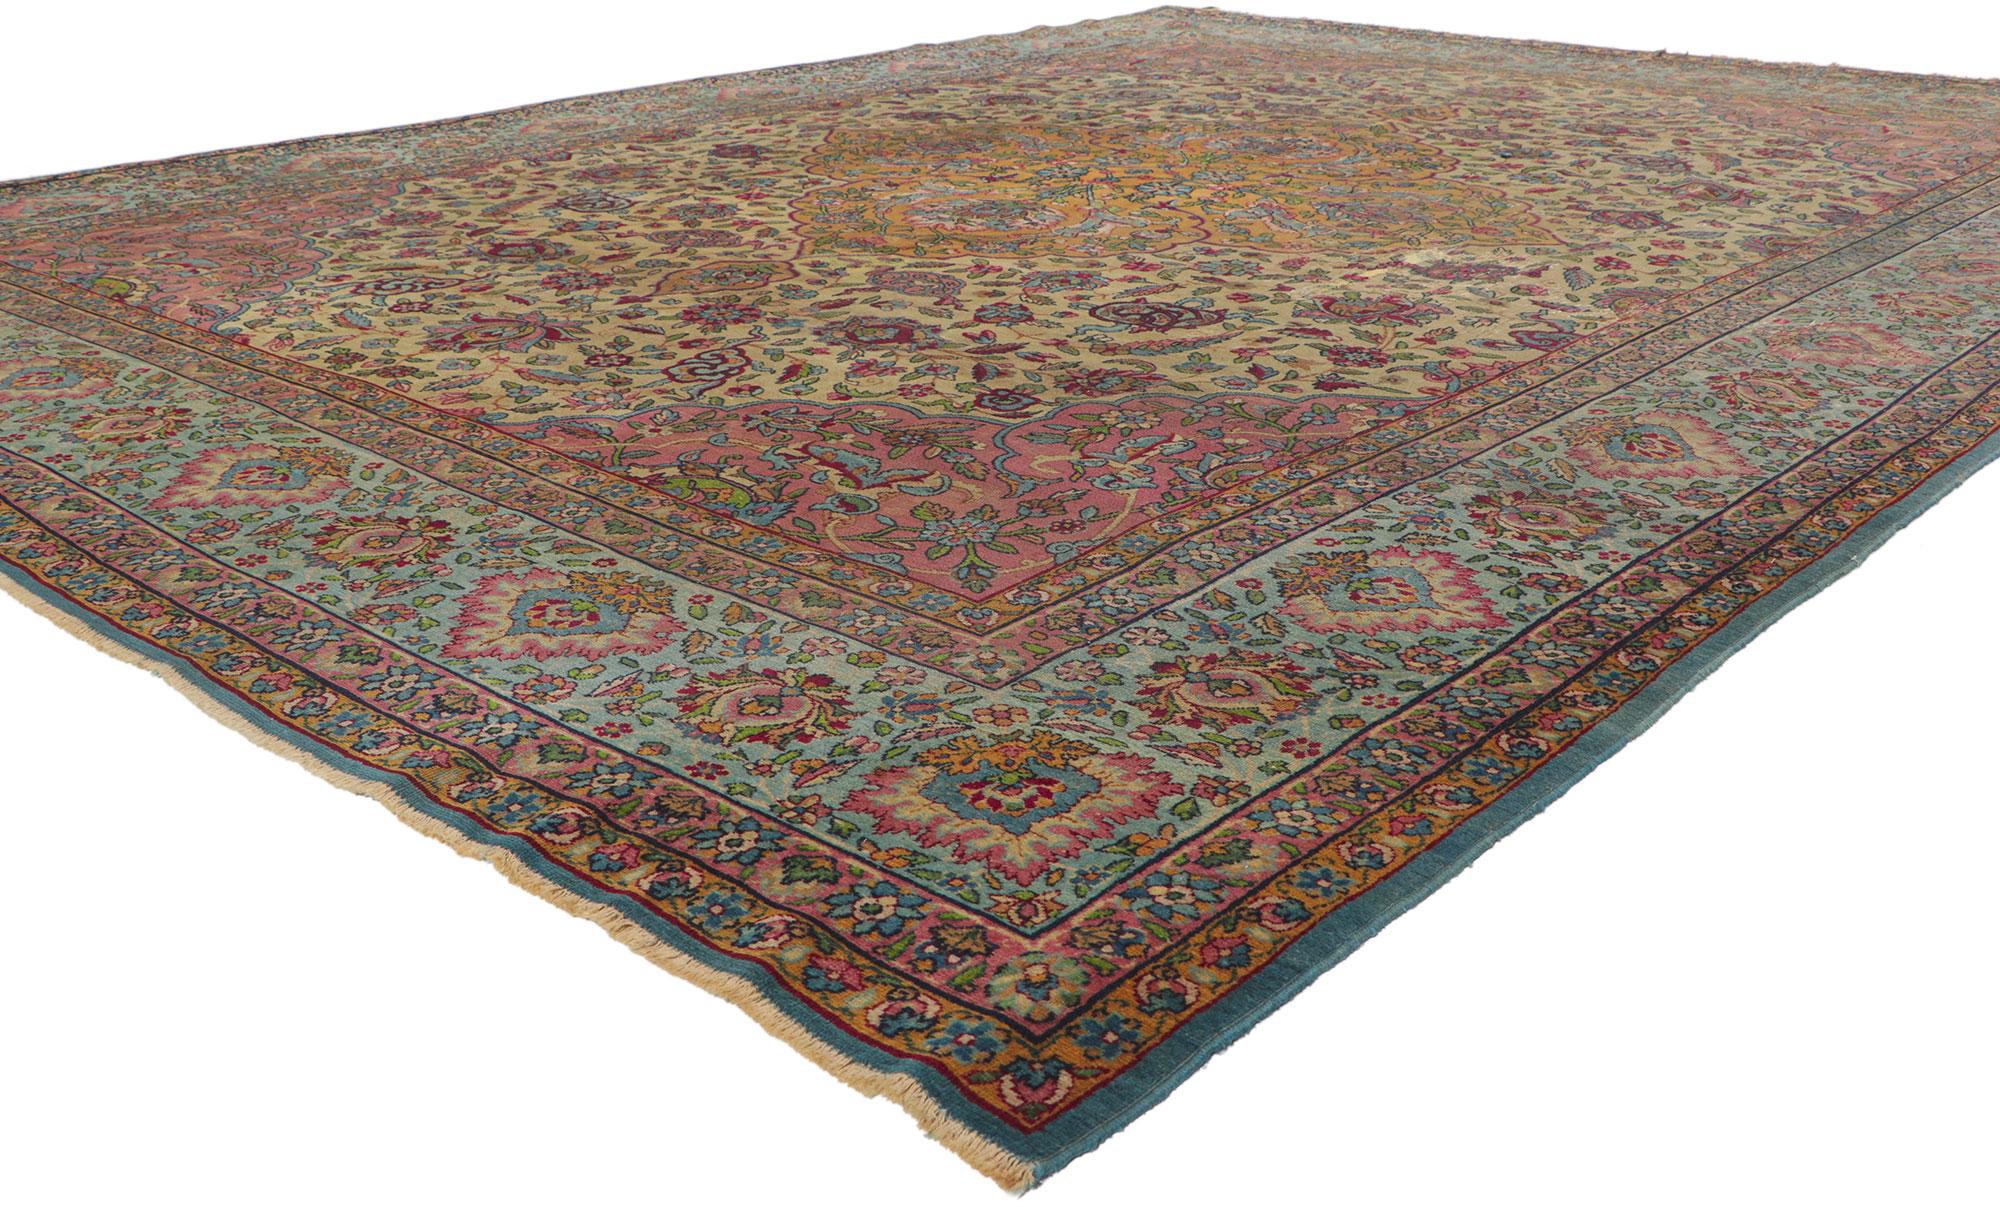 78297 Antique-Worn Persian Kerman Rug, 09'01 x 12'01.
The hand knotted wool antique Persian Kerman rug effortlessly combines the opulence of Bridgerton style with the elegance of Rococo. Its intricate design and enchanting color palette work